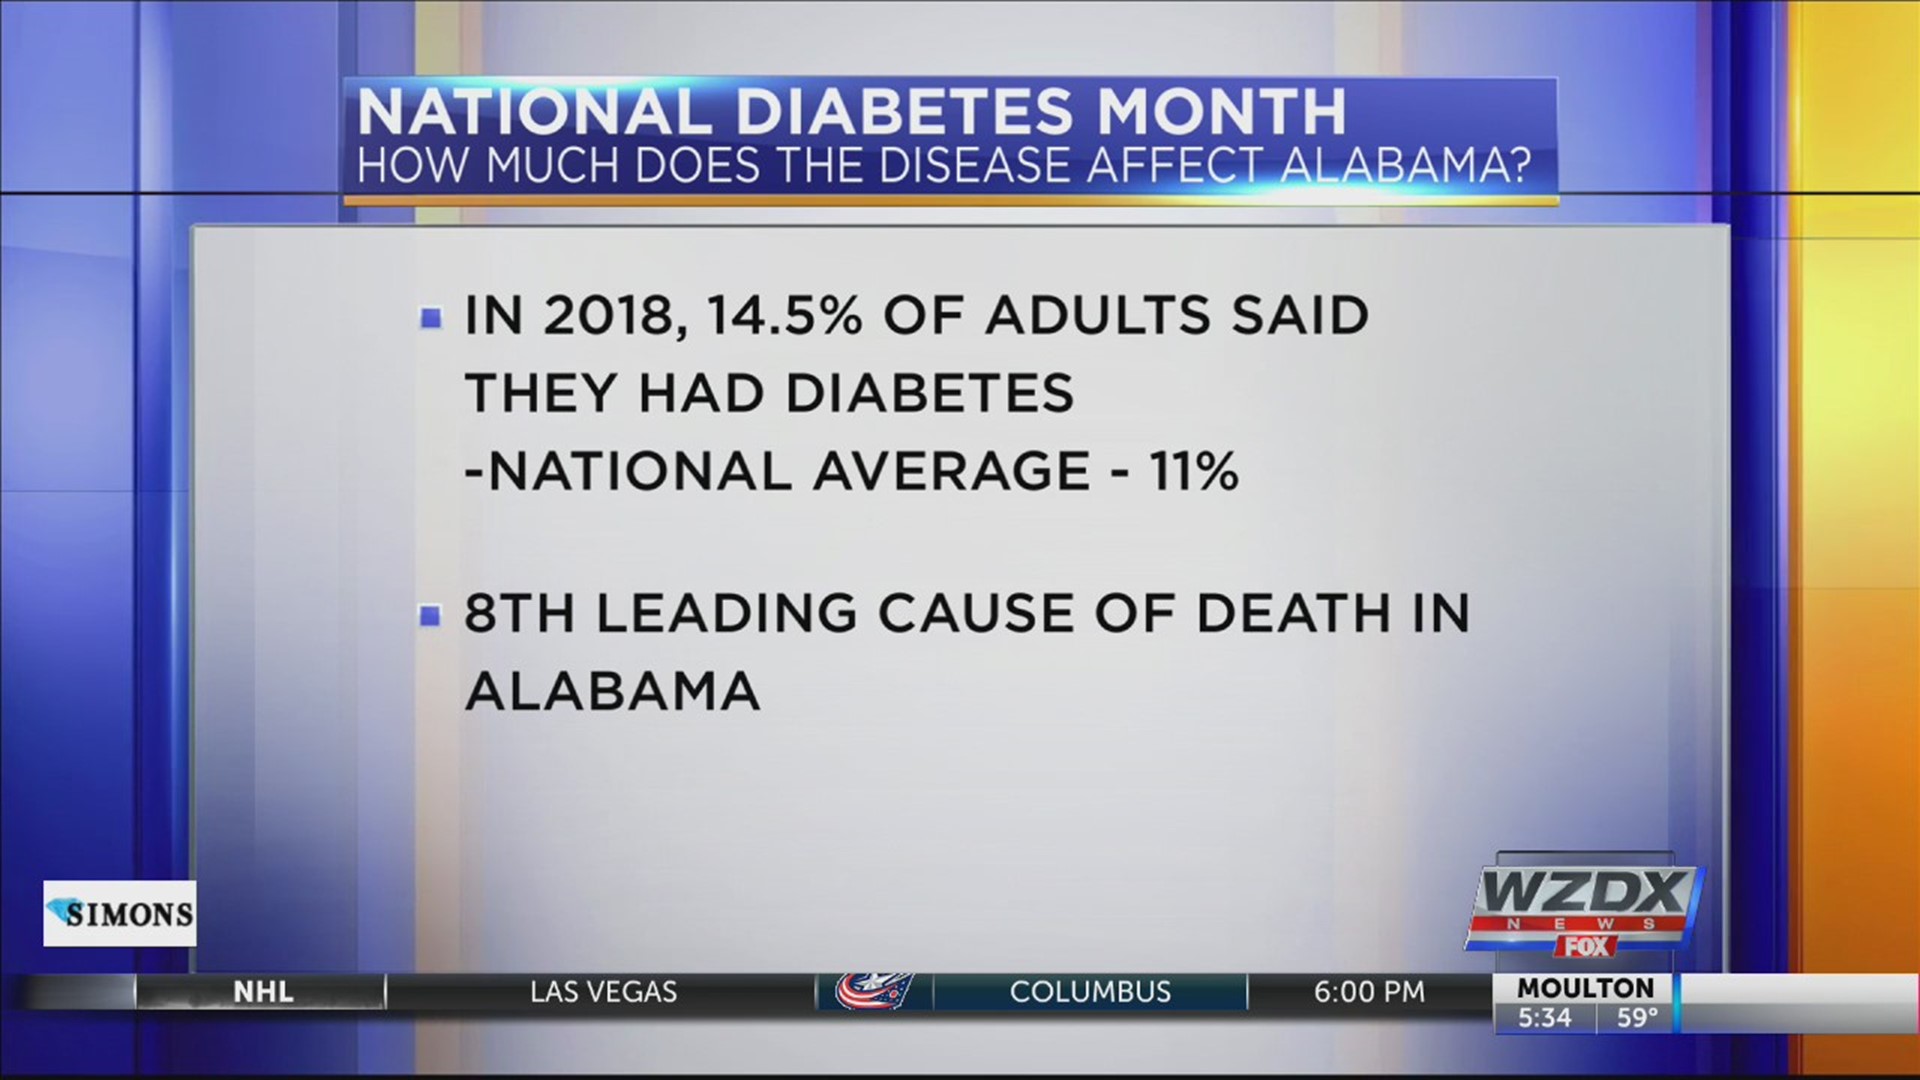 November is National Diabetes Month, so it's important to know just how much the disease affects us here.